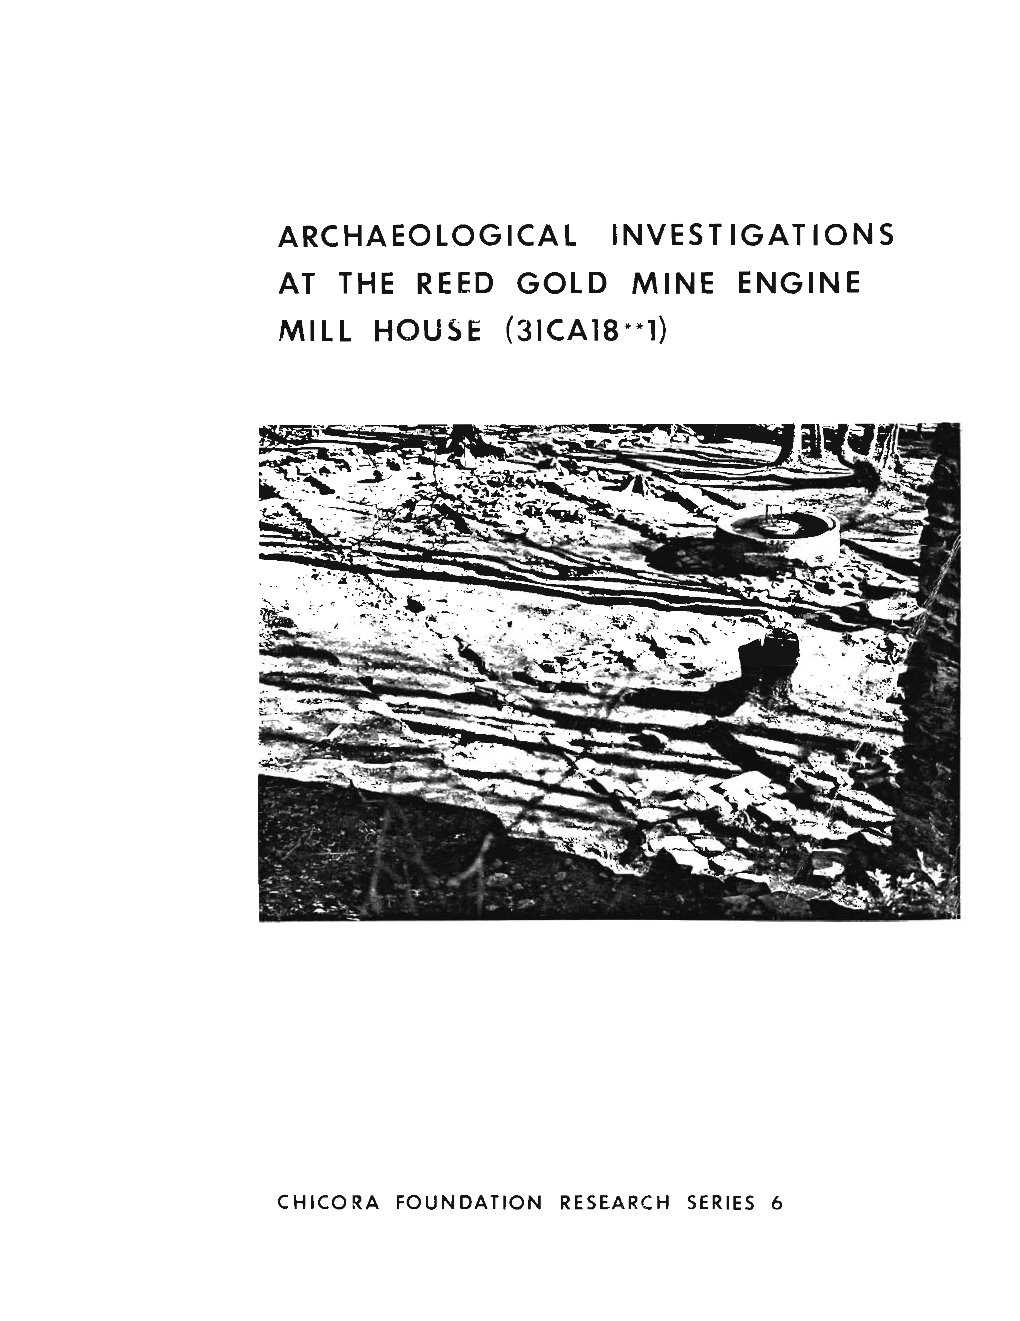 Archaeological Investigations at the Reed Gold Mine Engineer Mill House (31CA18**1)